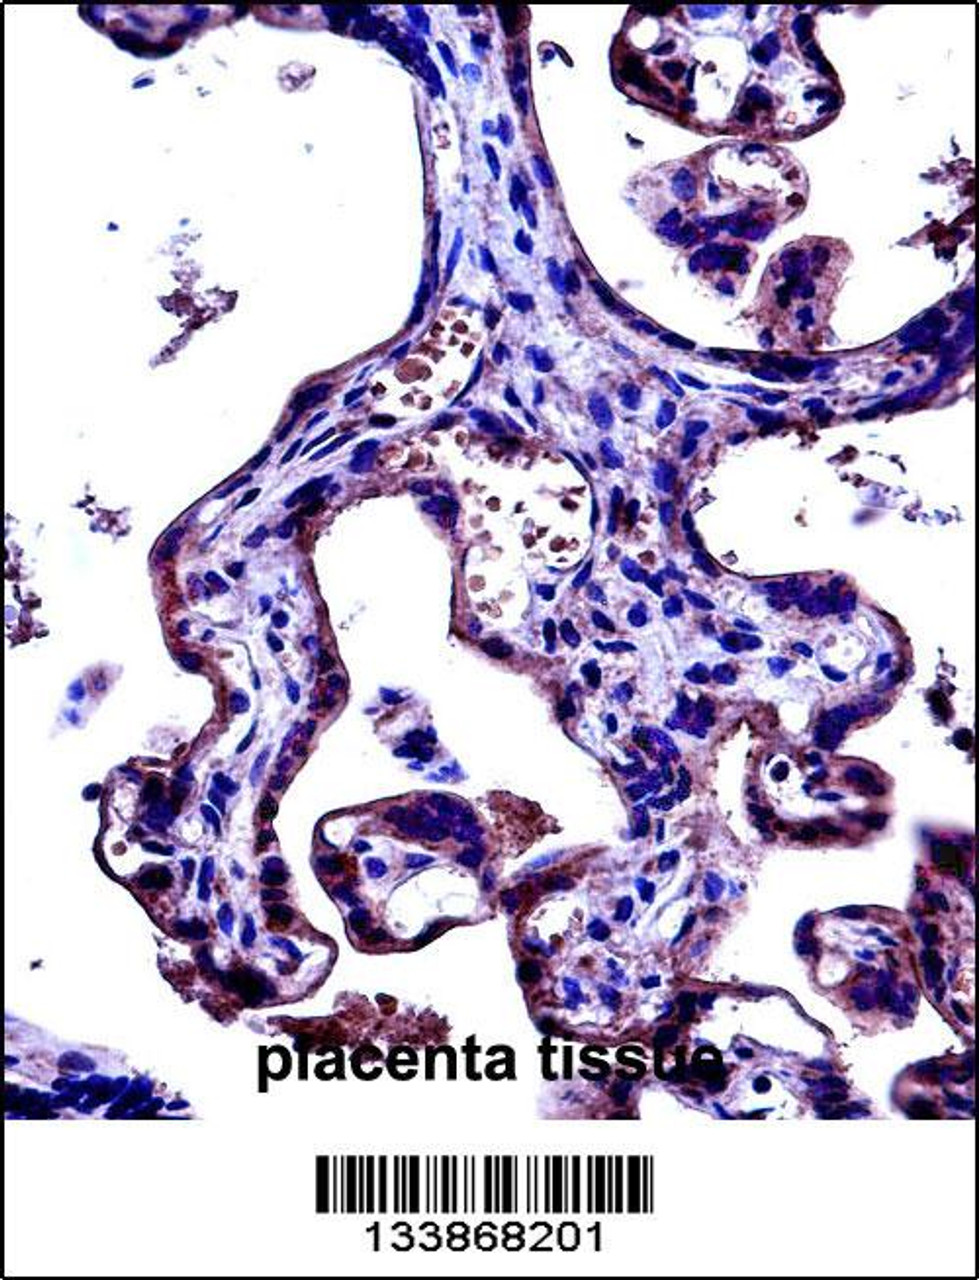 CD97 Antibody immunohistochemistry analysis in formalin fixed and paraffin embedded human placenta tissue followed by peroxidase conjugation of the secondary antibody and DAB staining.